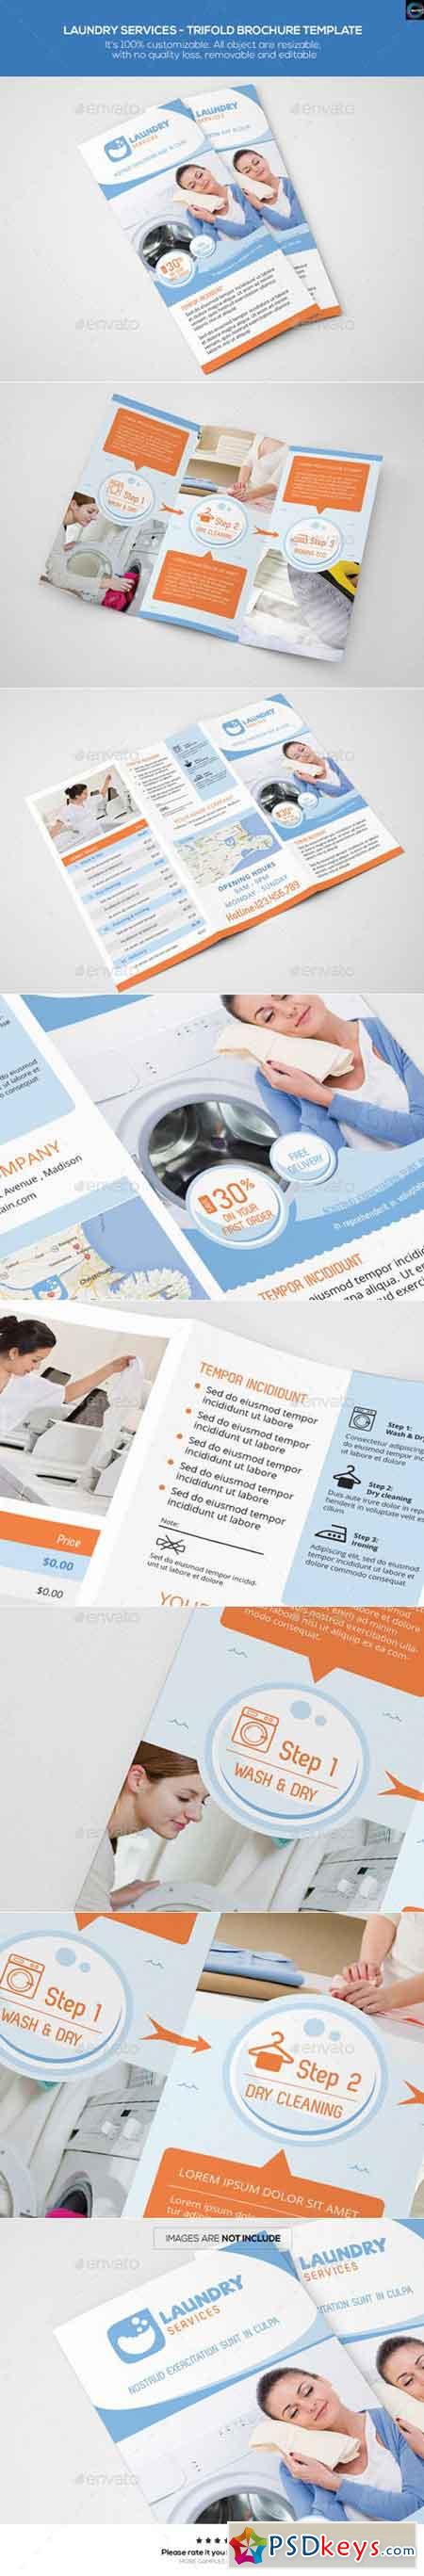 Laundry Services - Trifold Brochure Template 12616028